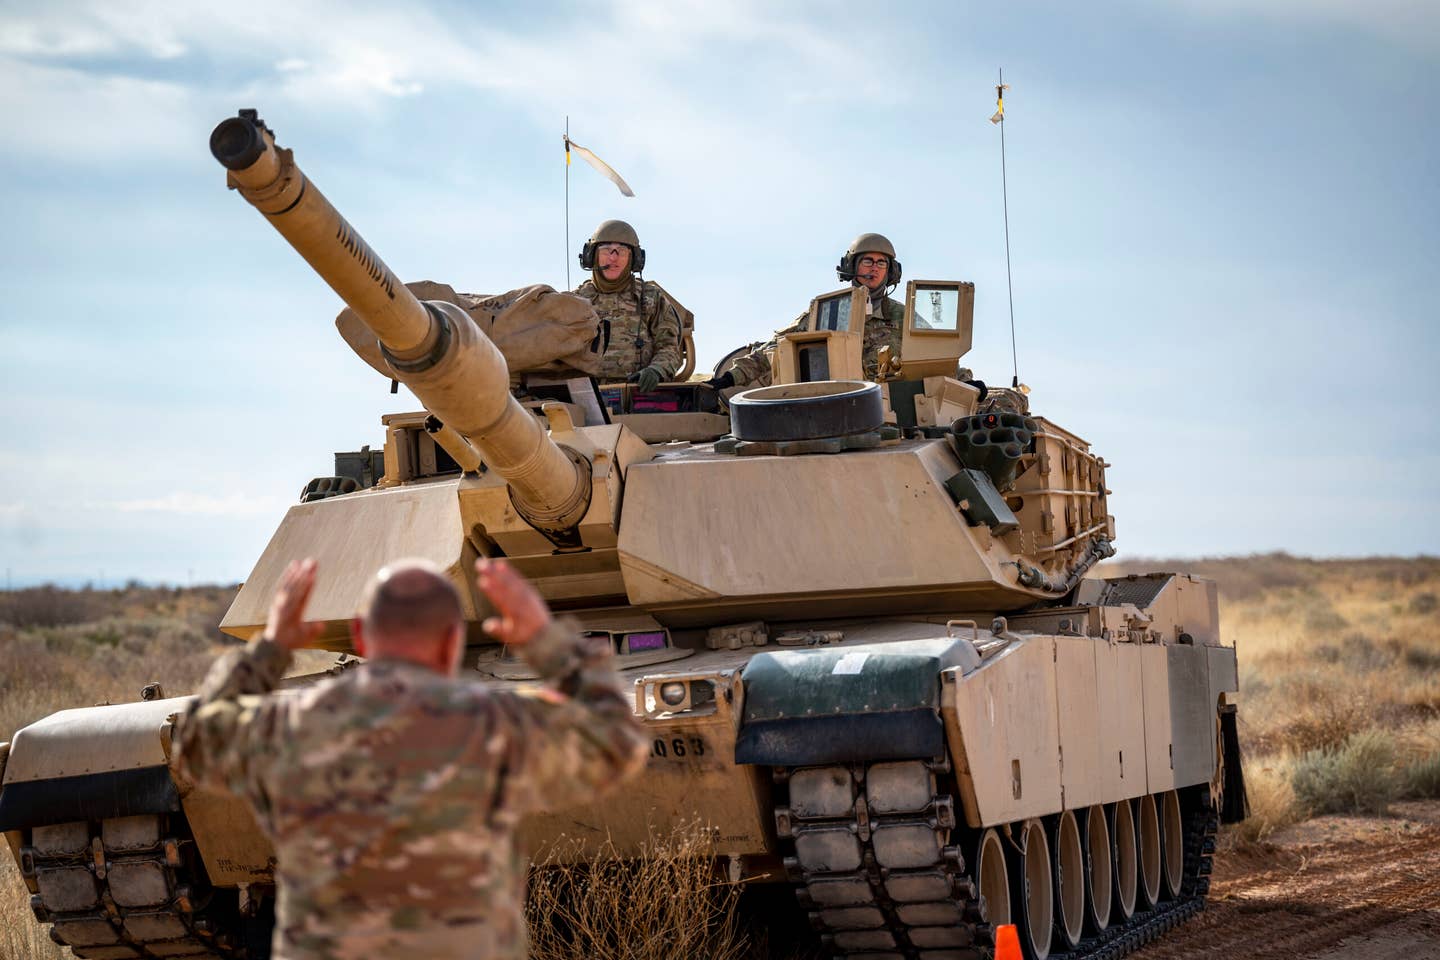 U.S. Army members assigned to the 1st Armored Division move an M1A2 Abrams tank into position to simulate receiving fuel from a 40th Airlift Squadron C-130J Super Hercules at Fort Bliss. <em>Credit: U.S. Air Force photo by Senior Airman Leon Redfern</em>